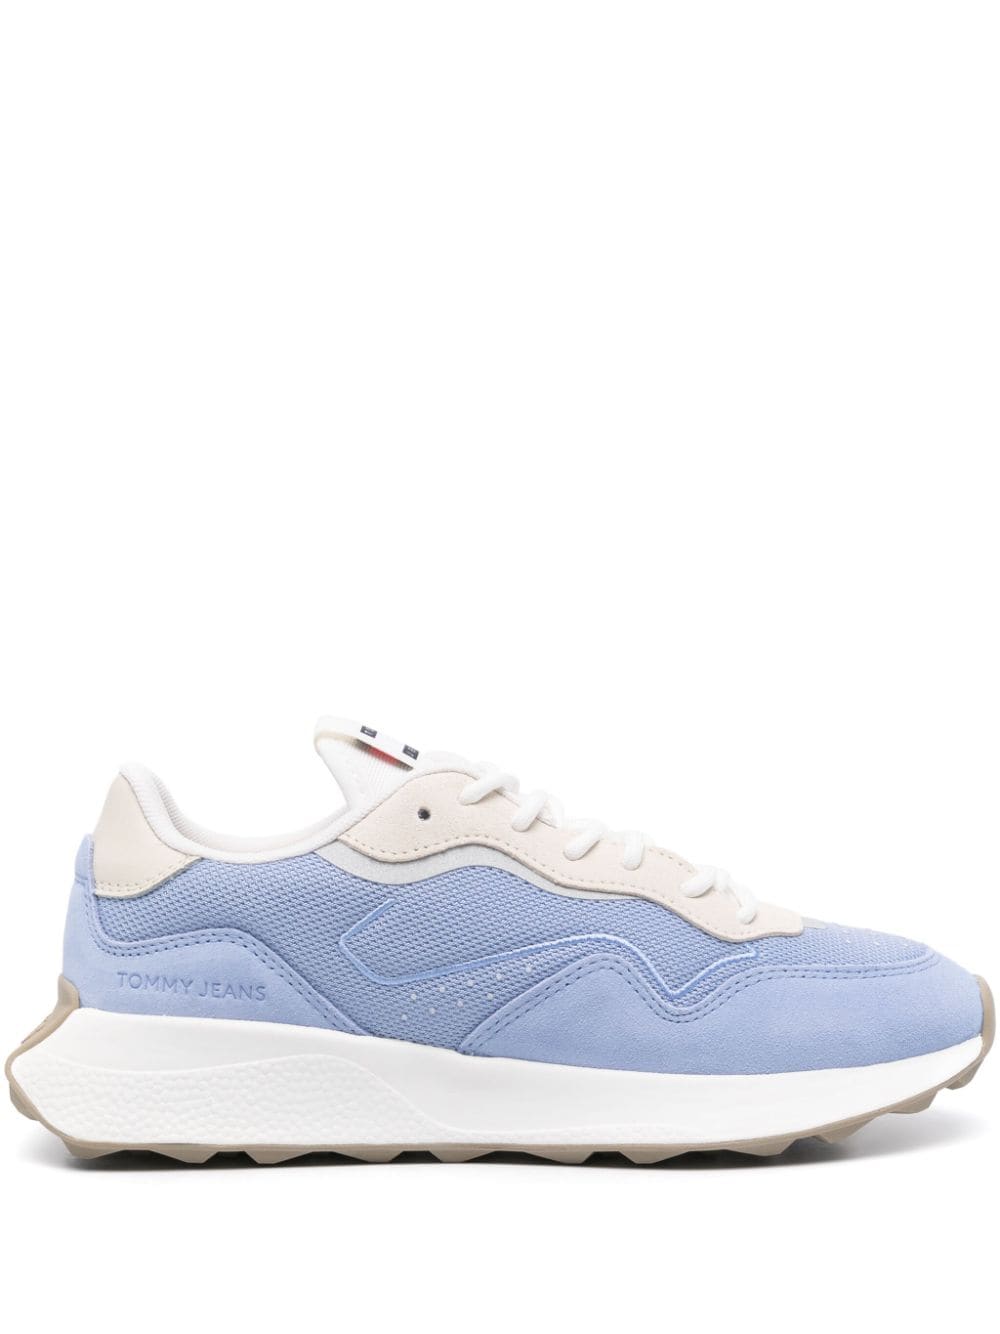 Tommy Hilfiger Retro panelled sneakers Blue